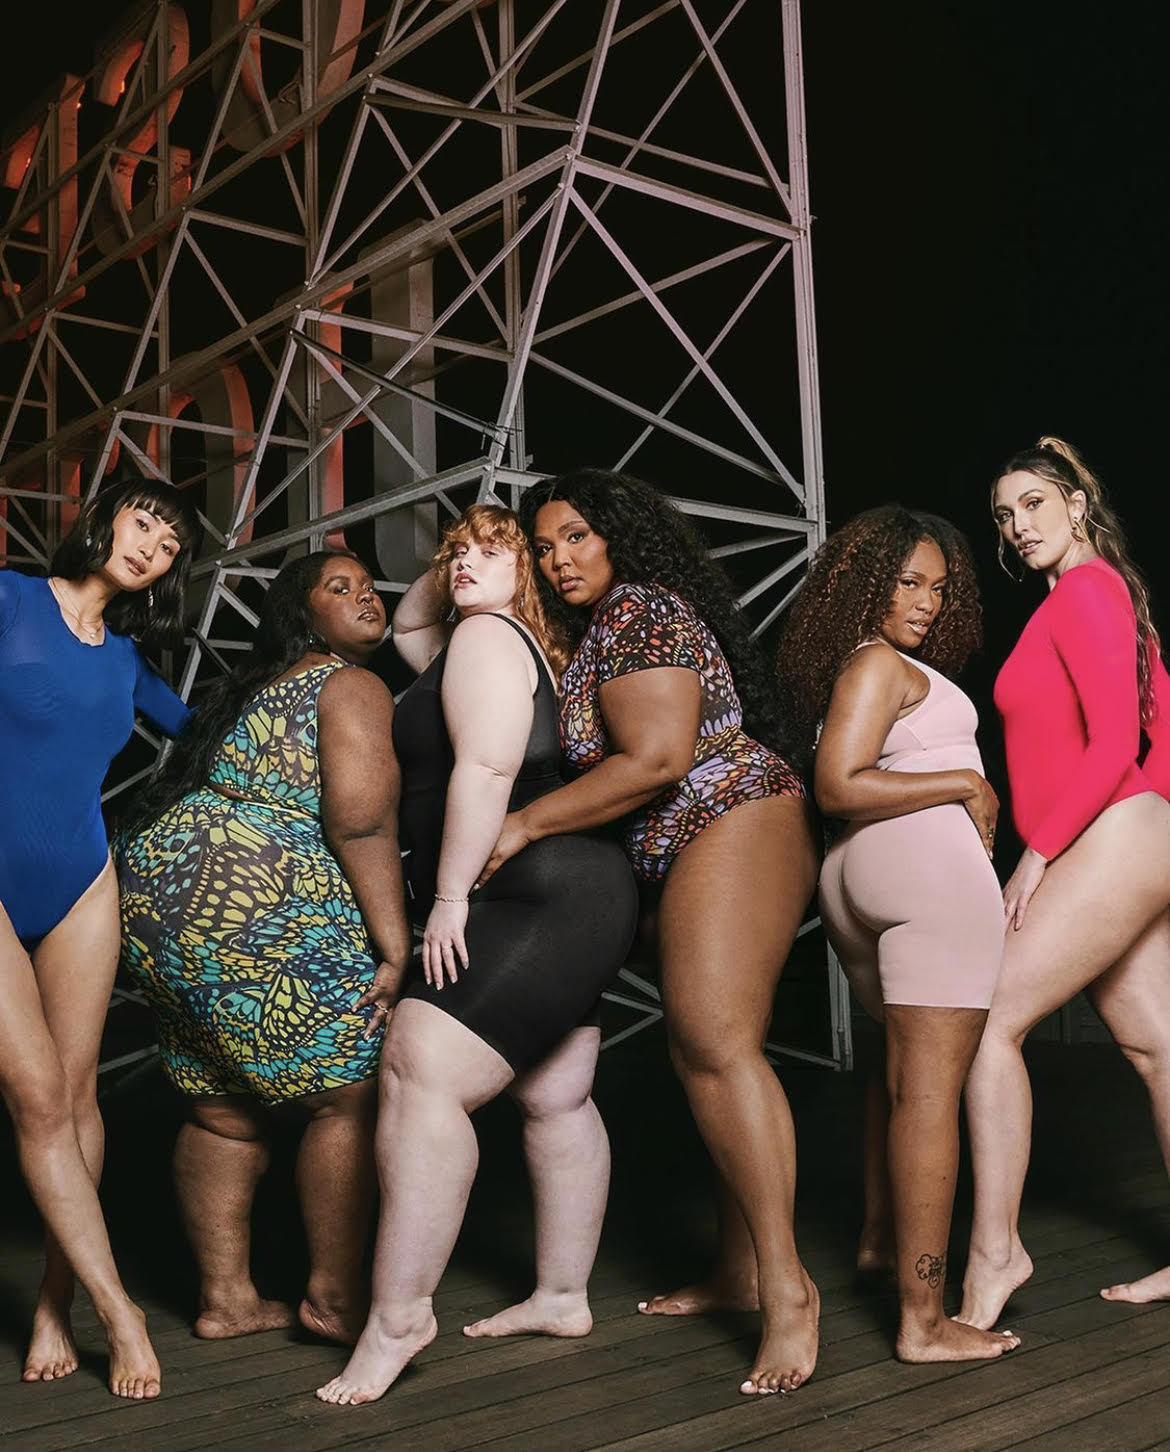 Lizzo's yitty shapewear line with fabletics